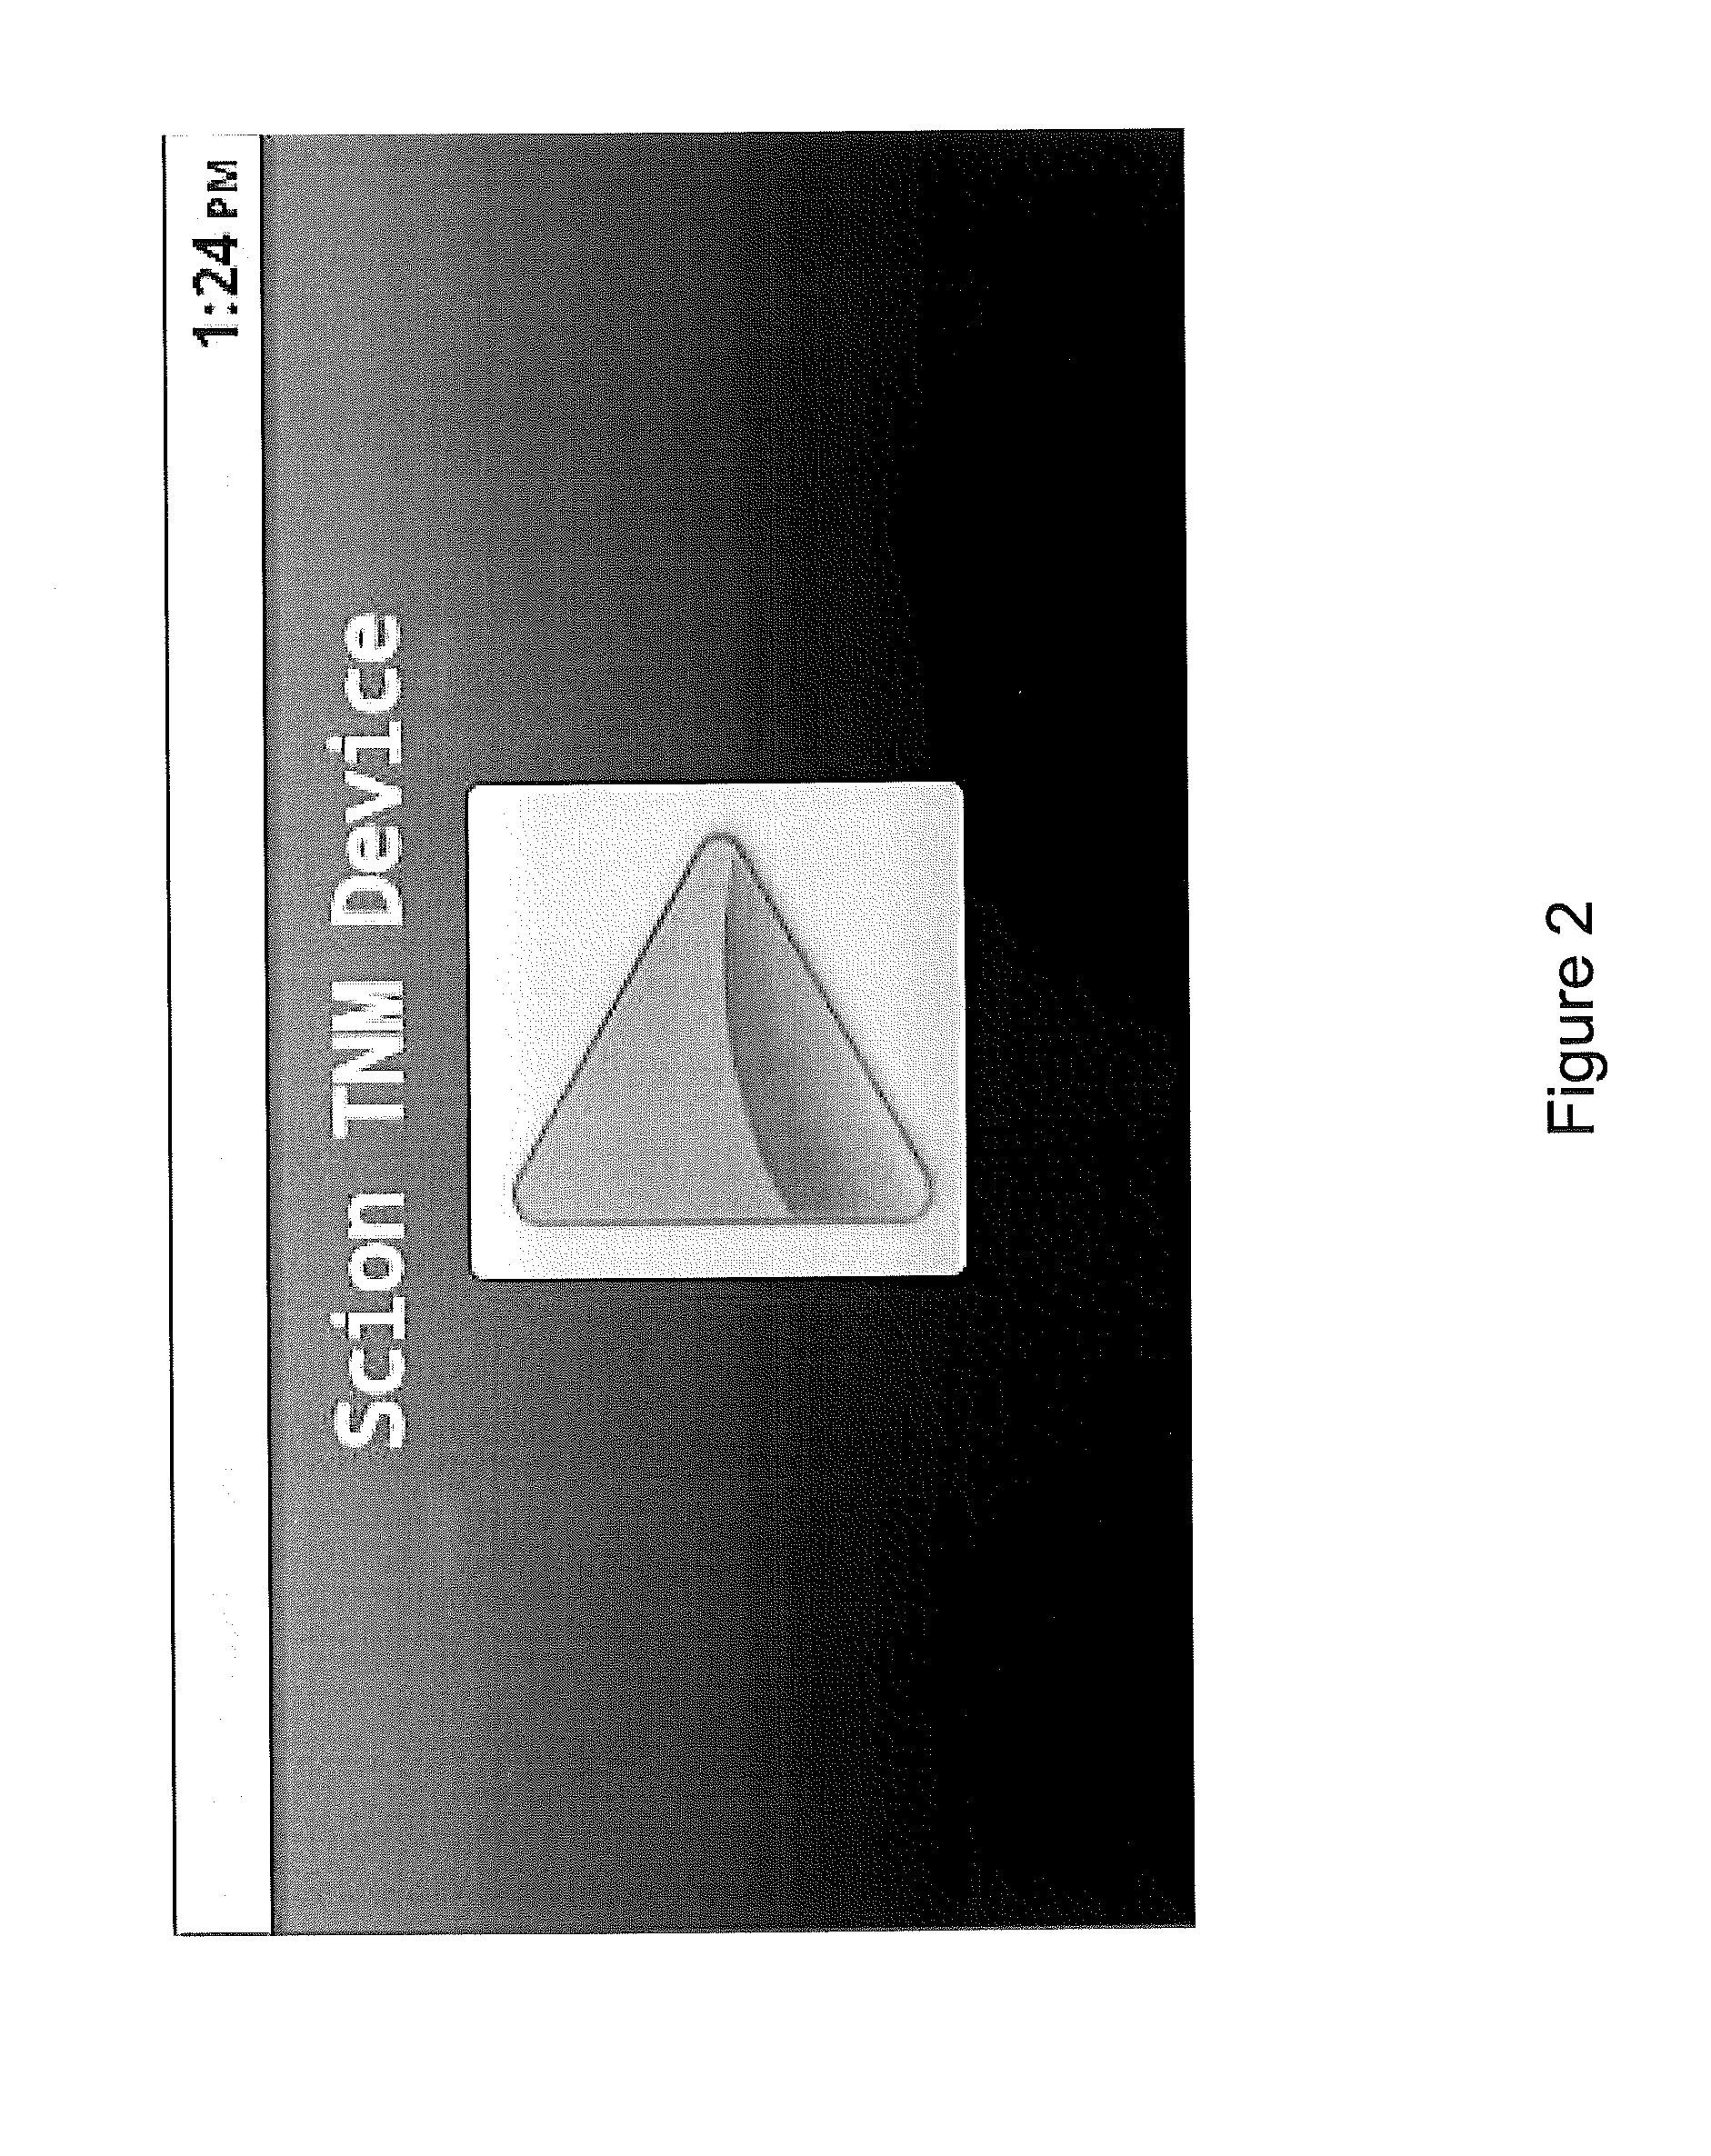 Apparatus and methods for producing brain activation via the vestibular system with time-varying waveforms